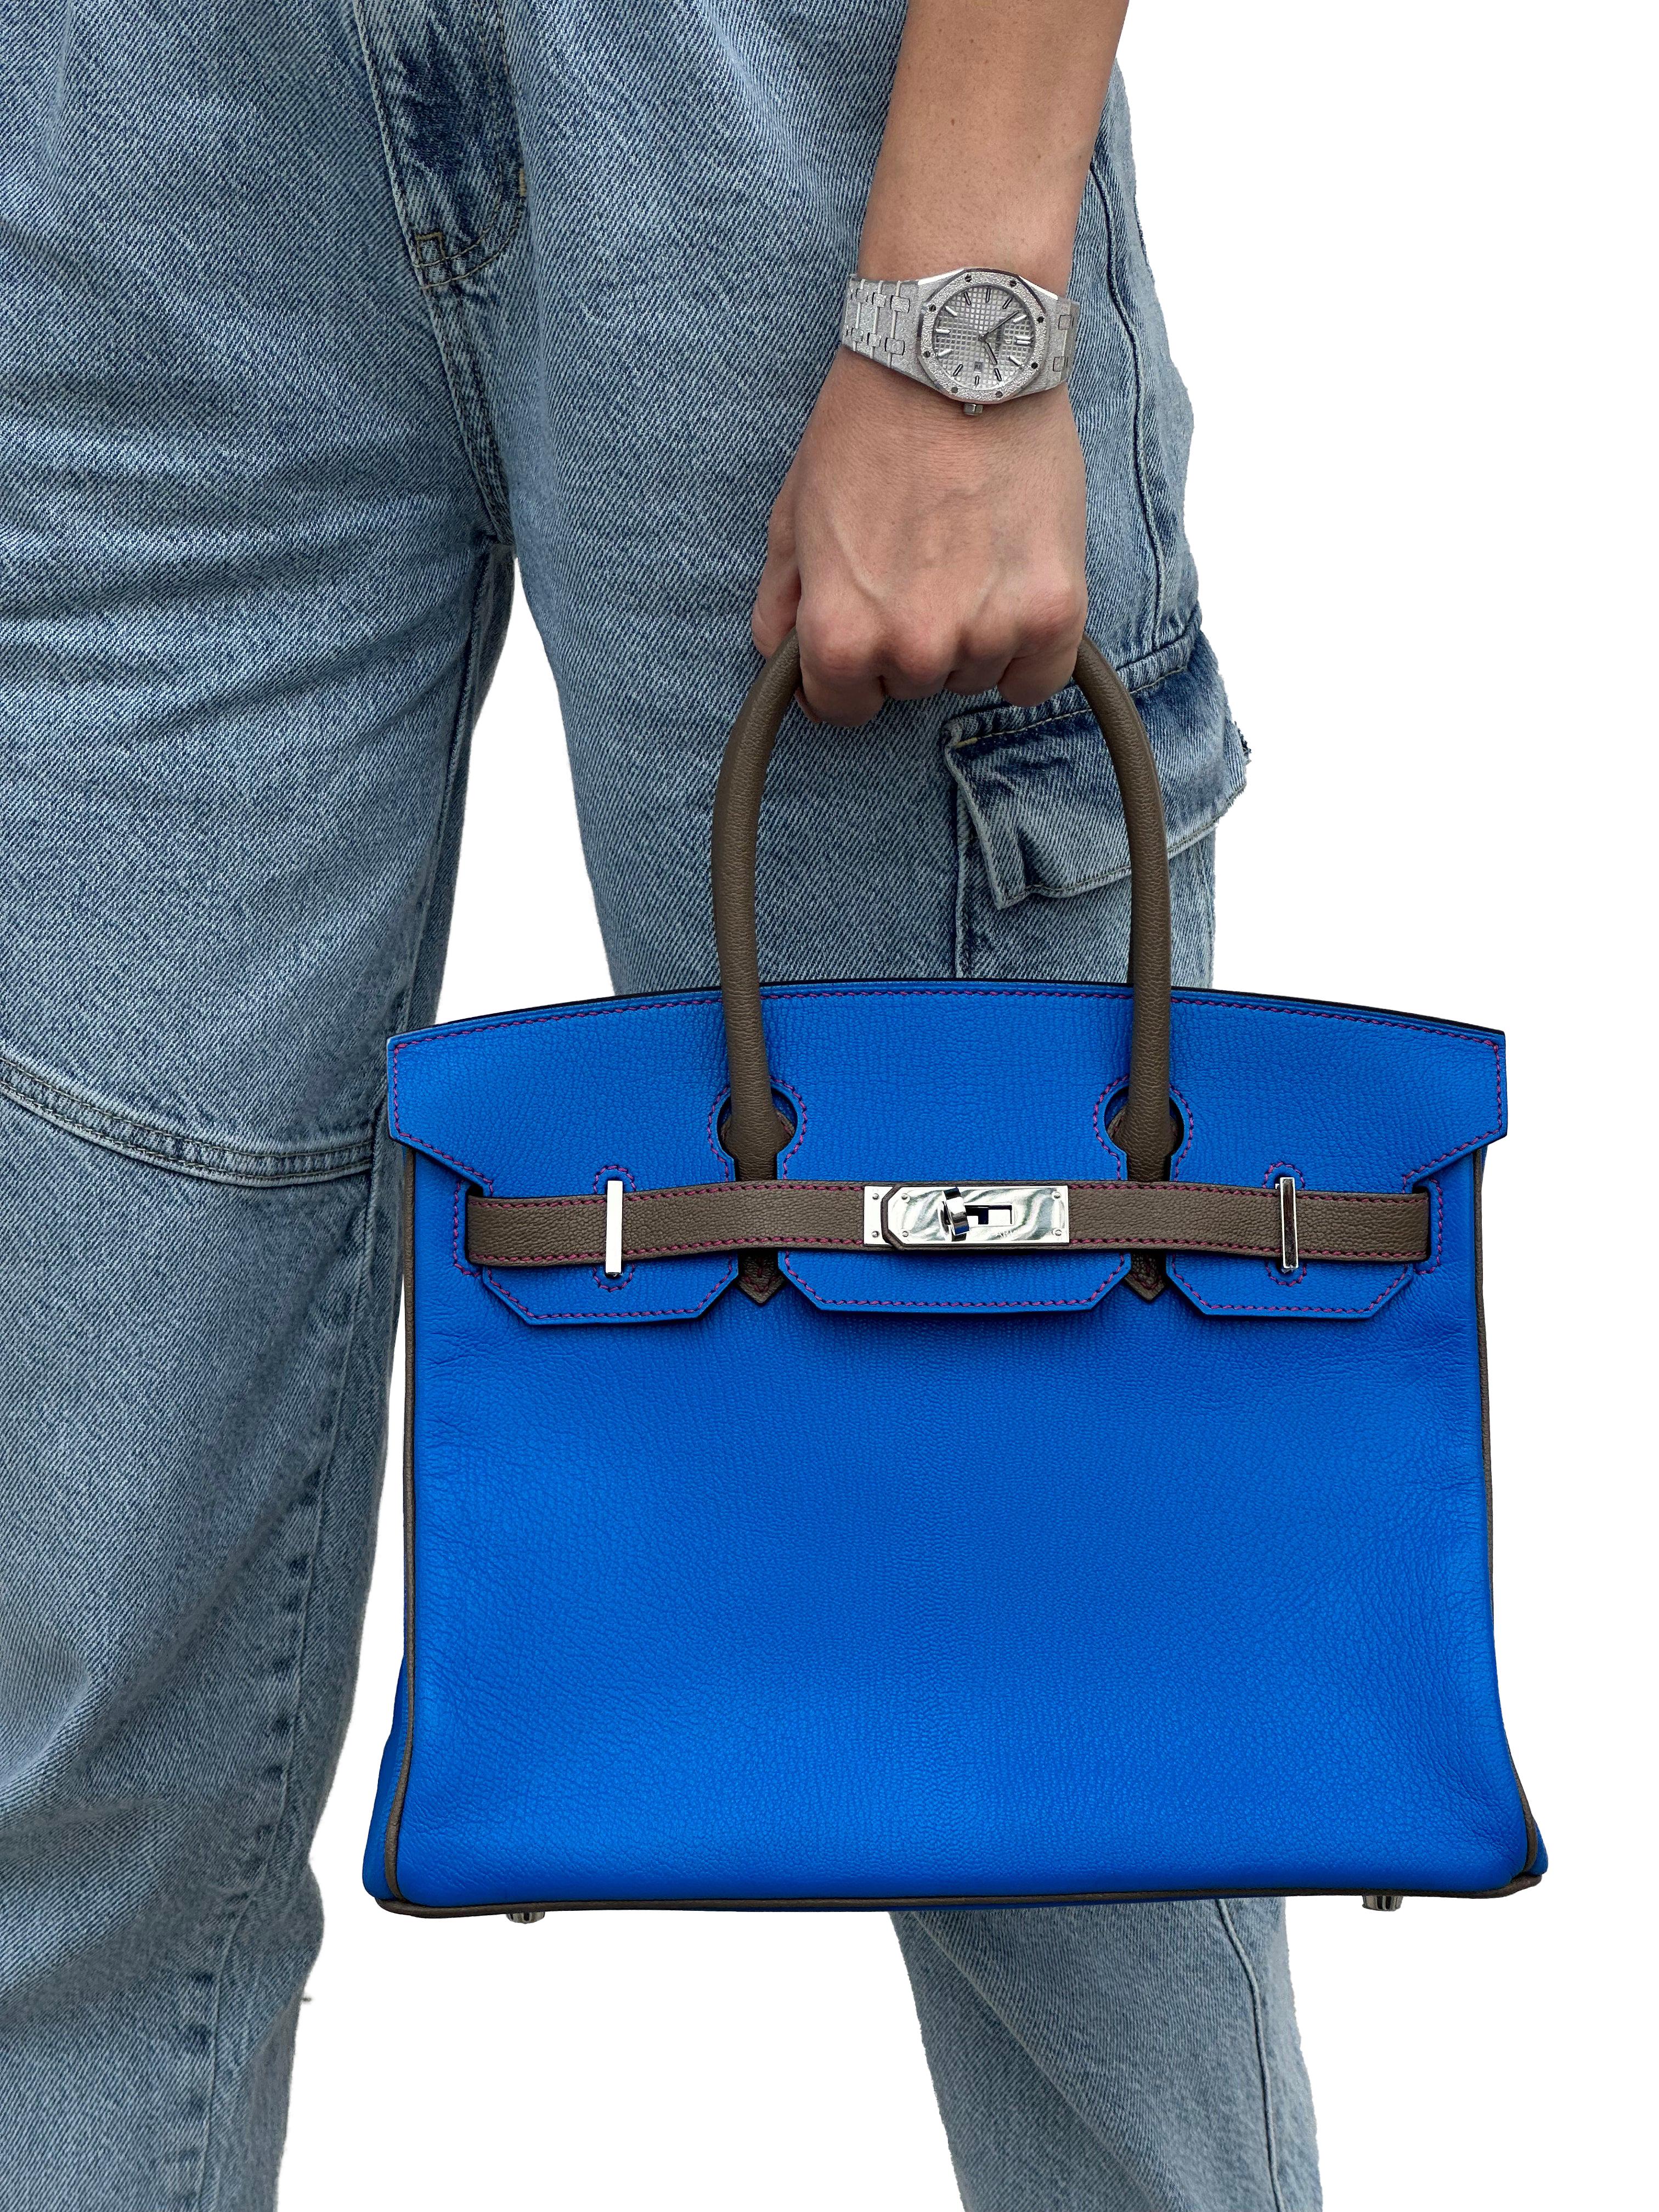 Hermes Birkin HSS 30 Electric Blue Etoupe Chevre with Gold Hardware For Sale 7